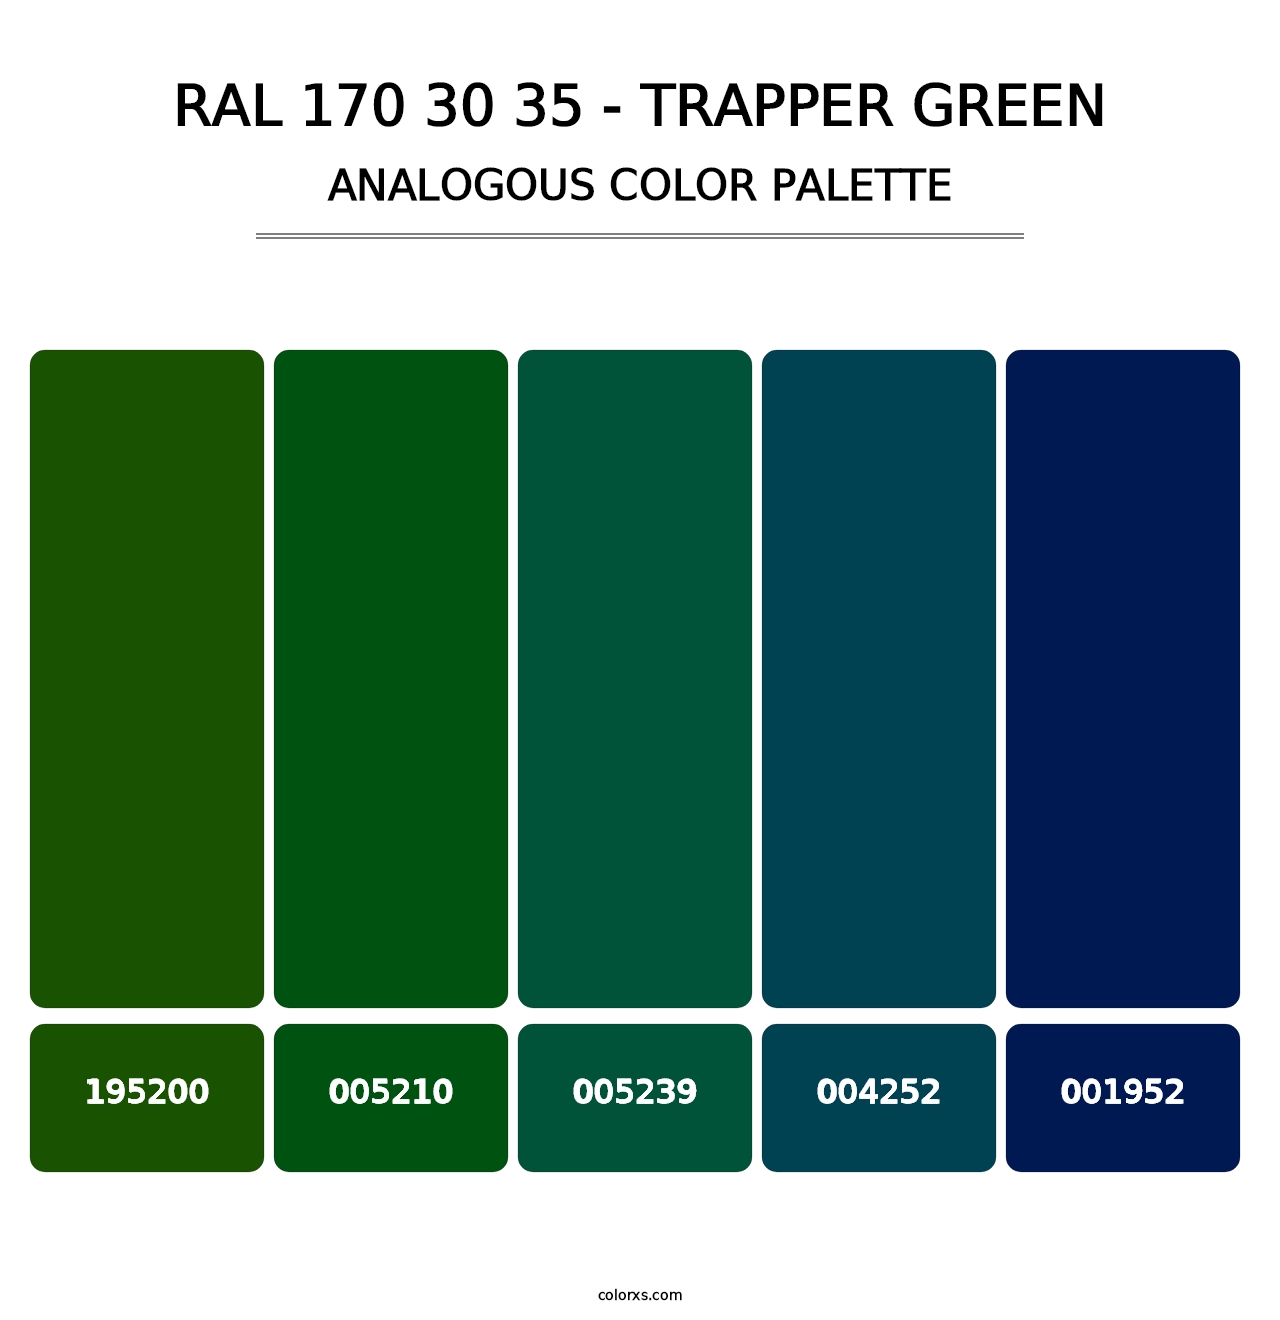 RAL 170 30 35 - Trapper Green - Analogous Color Palette